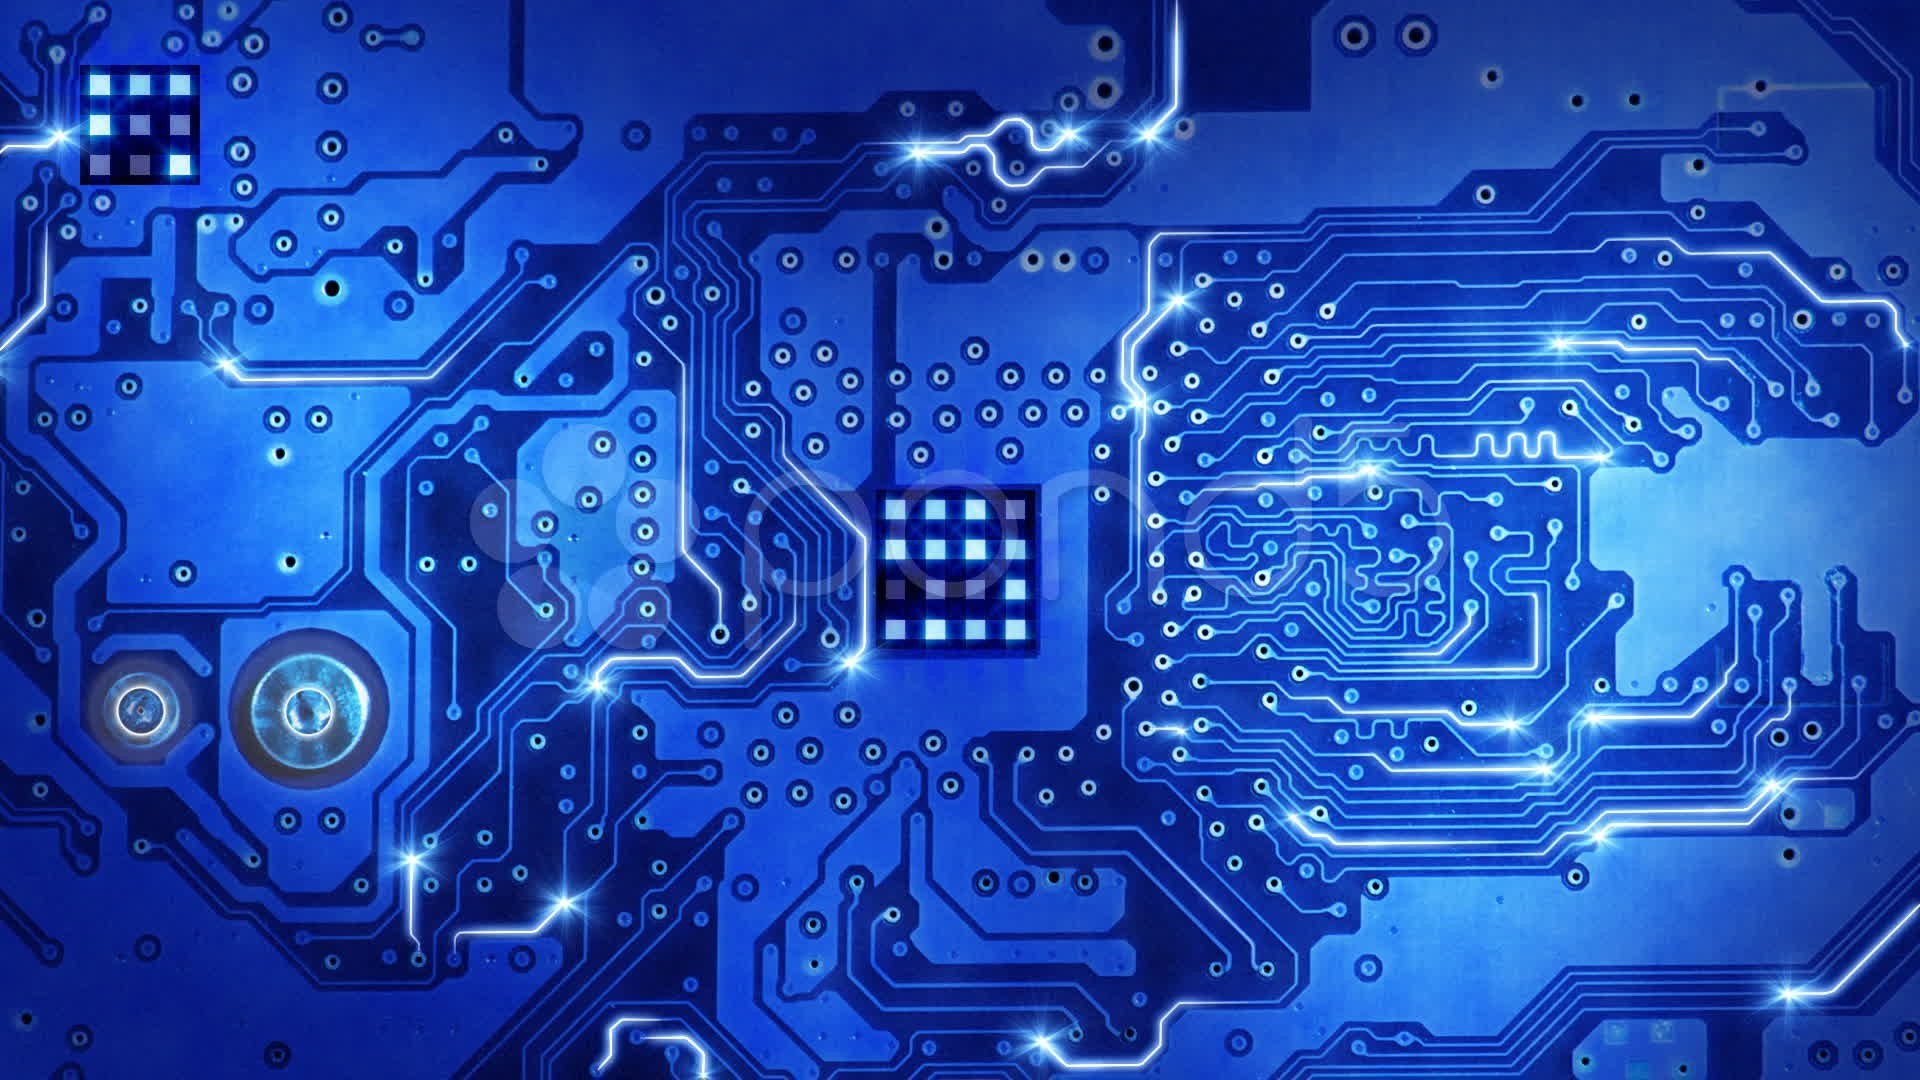 motherboard wallpaper,electronic engineering,blue,motherboard,electronics,water